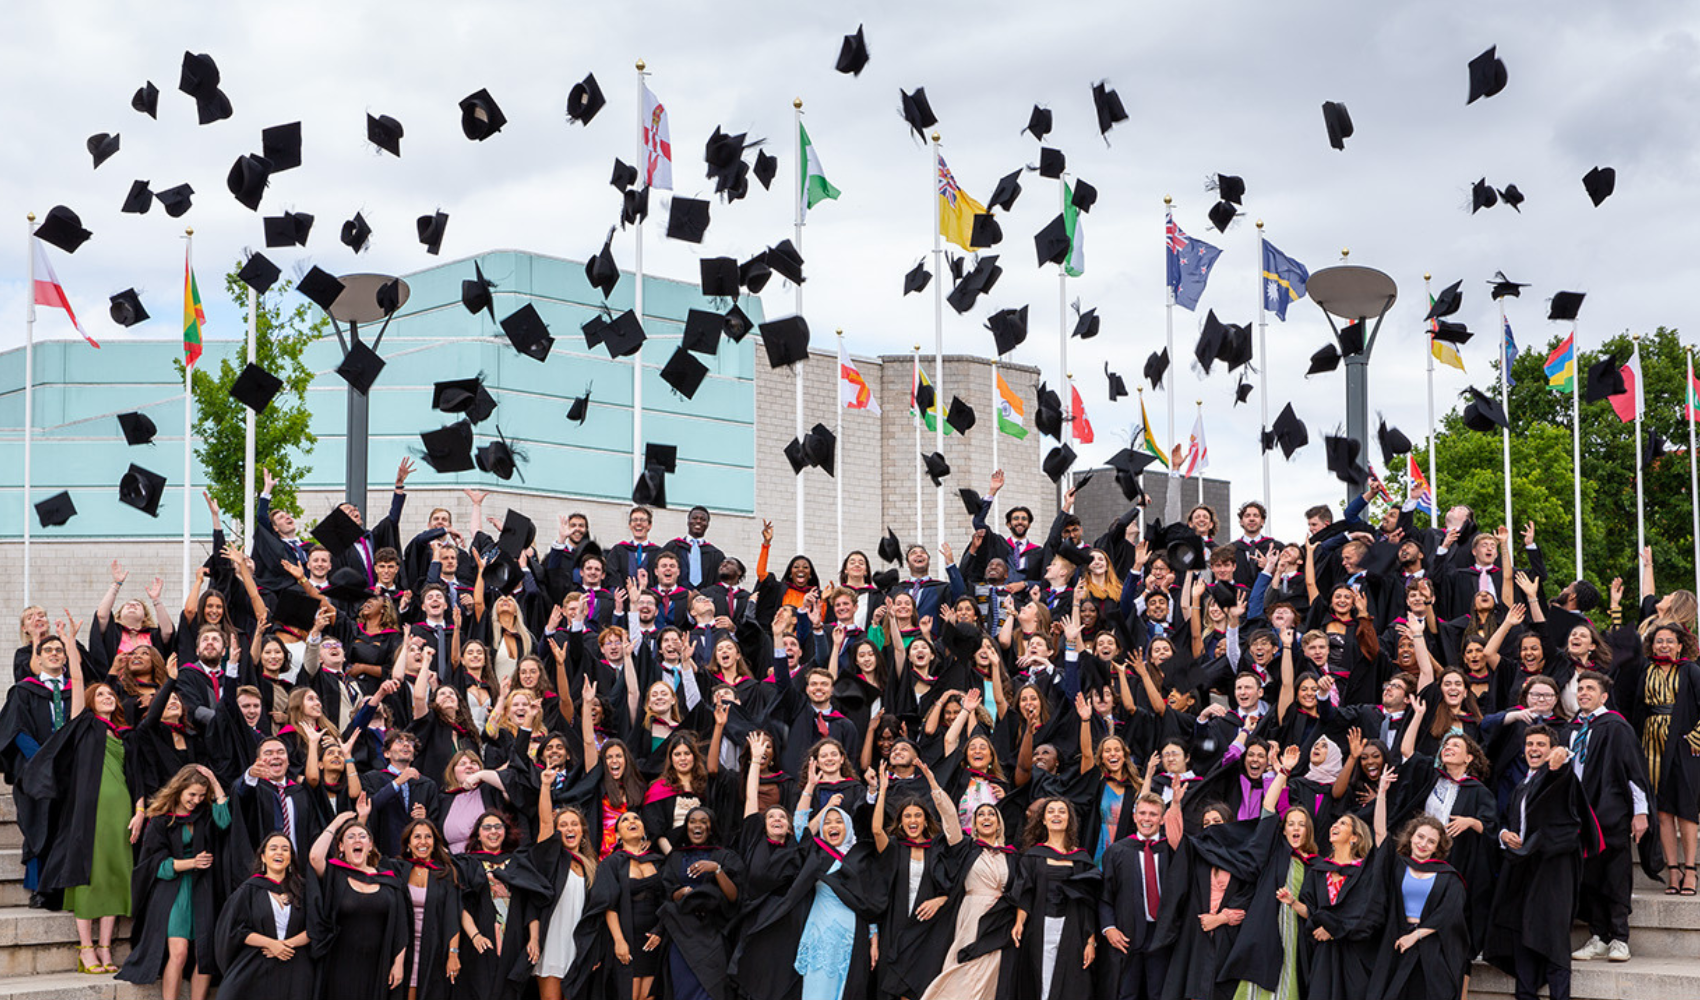 University of Warwick graduates toss their caps in the air